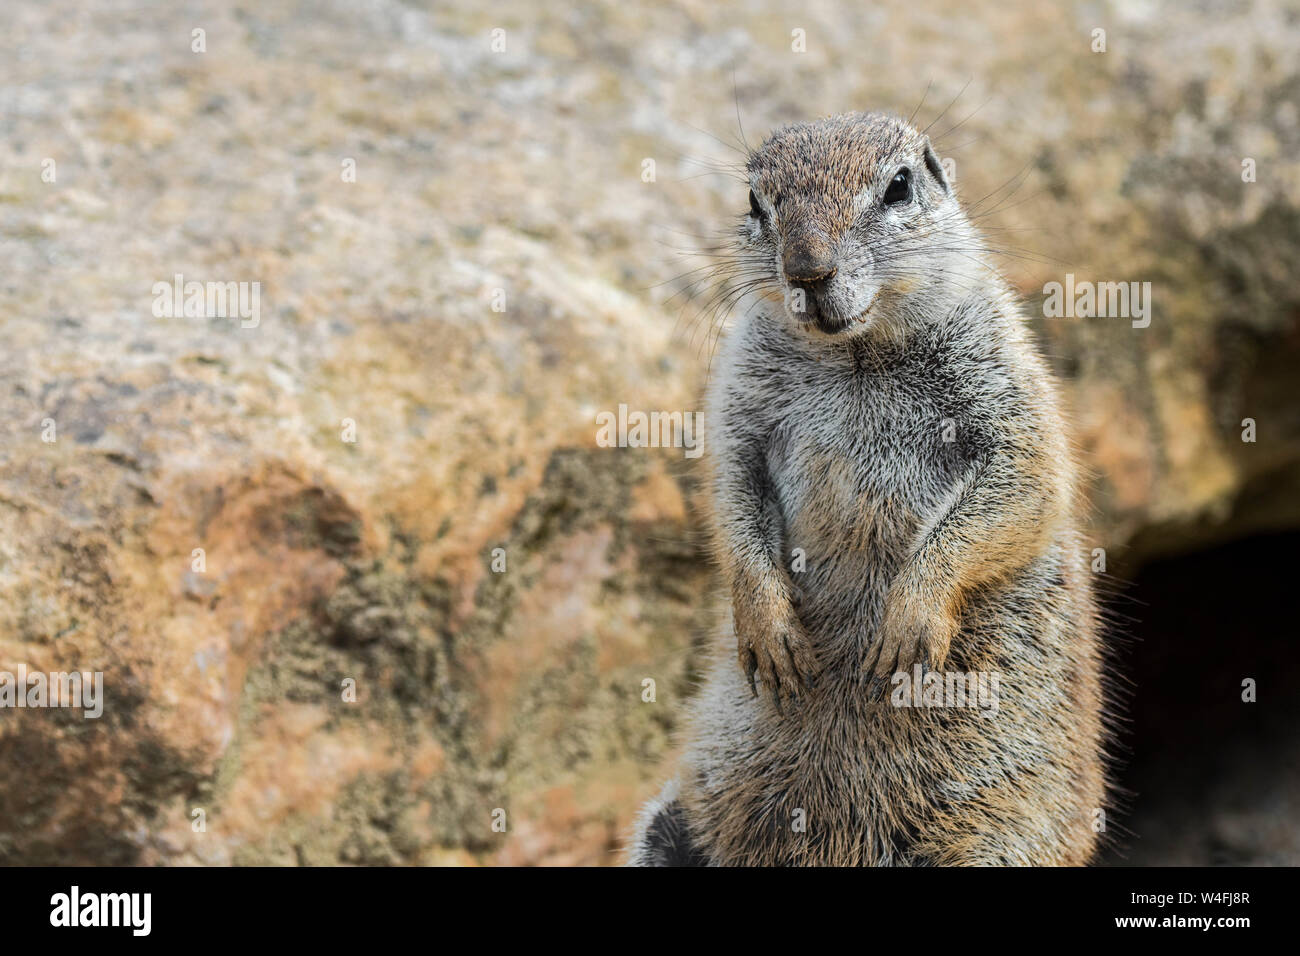 Cape ground squirrel (Xerus inauris) native to Southern Africa Stock Photo